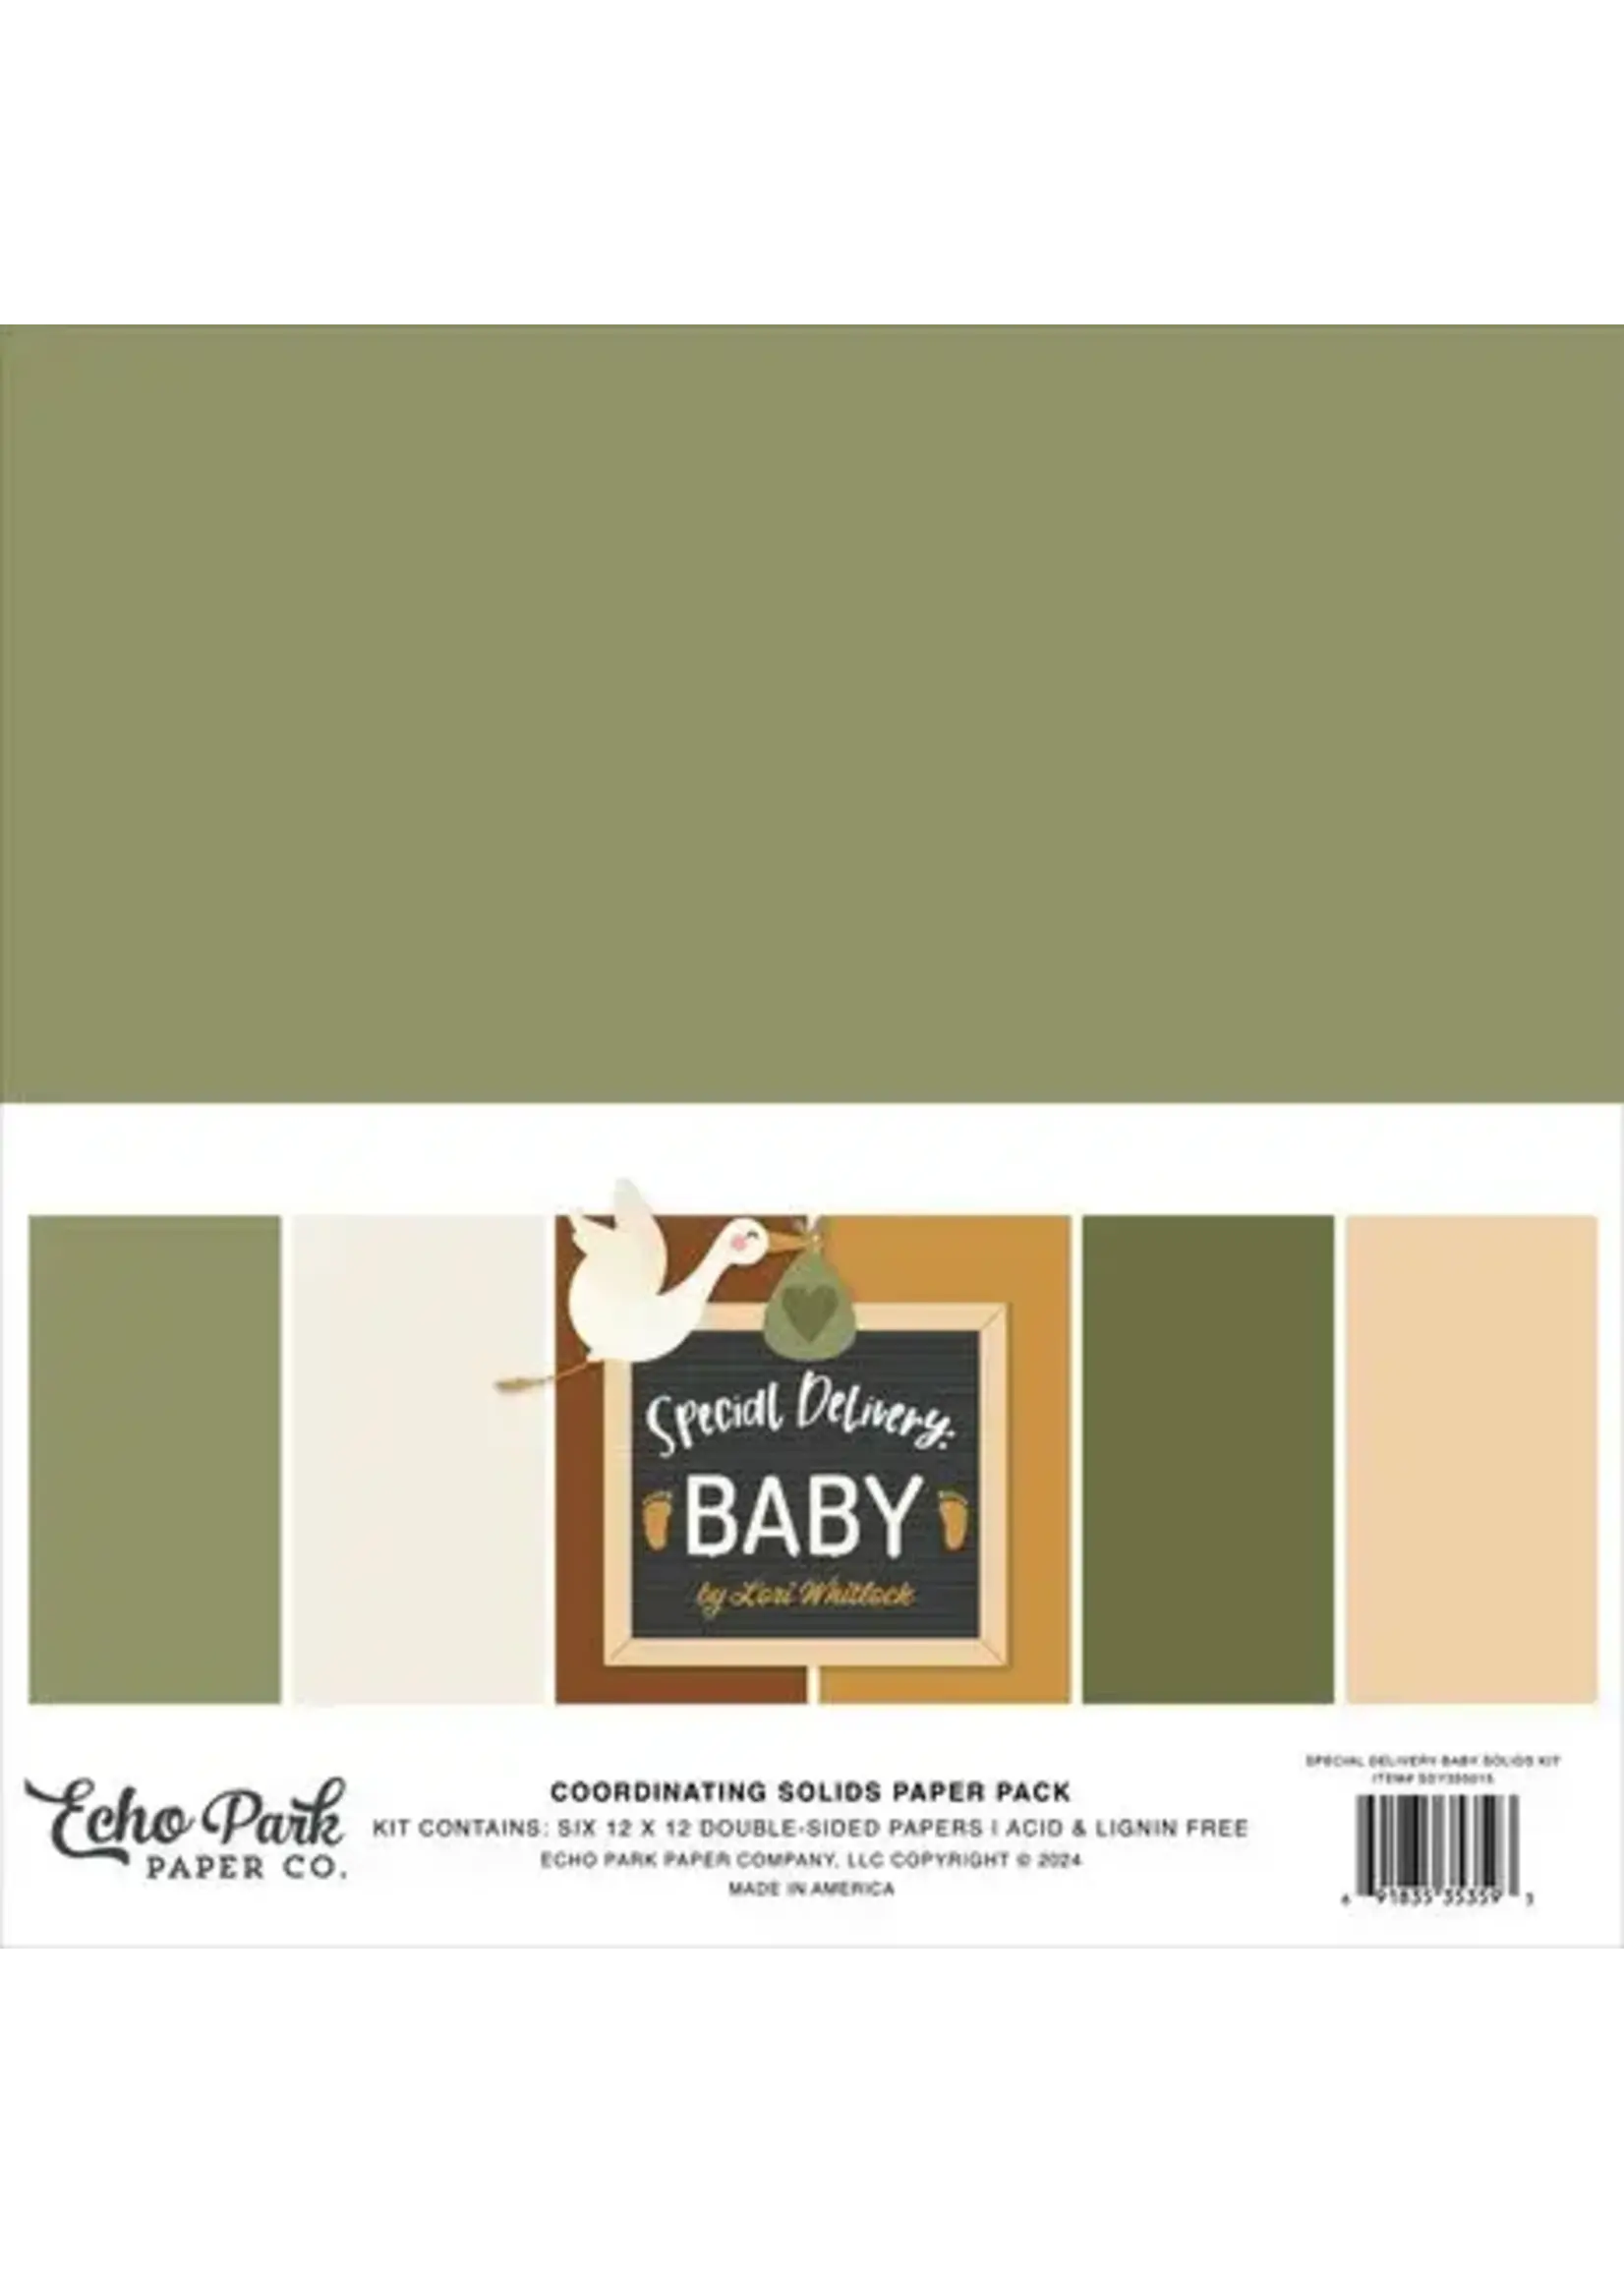 Special Delivery Baby 12x12 Inch Coordinating Solids Paper Pack (SDY355015)